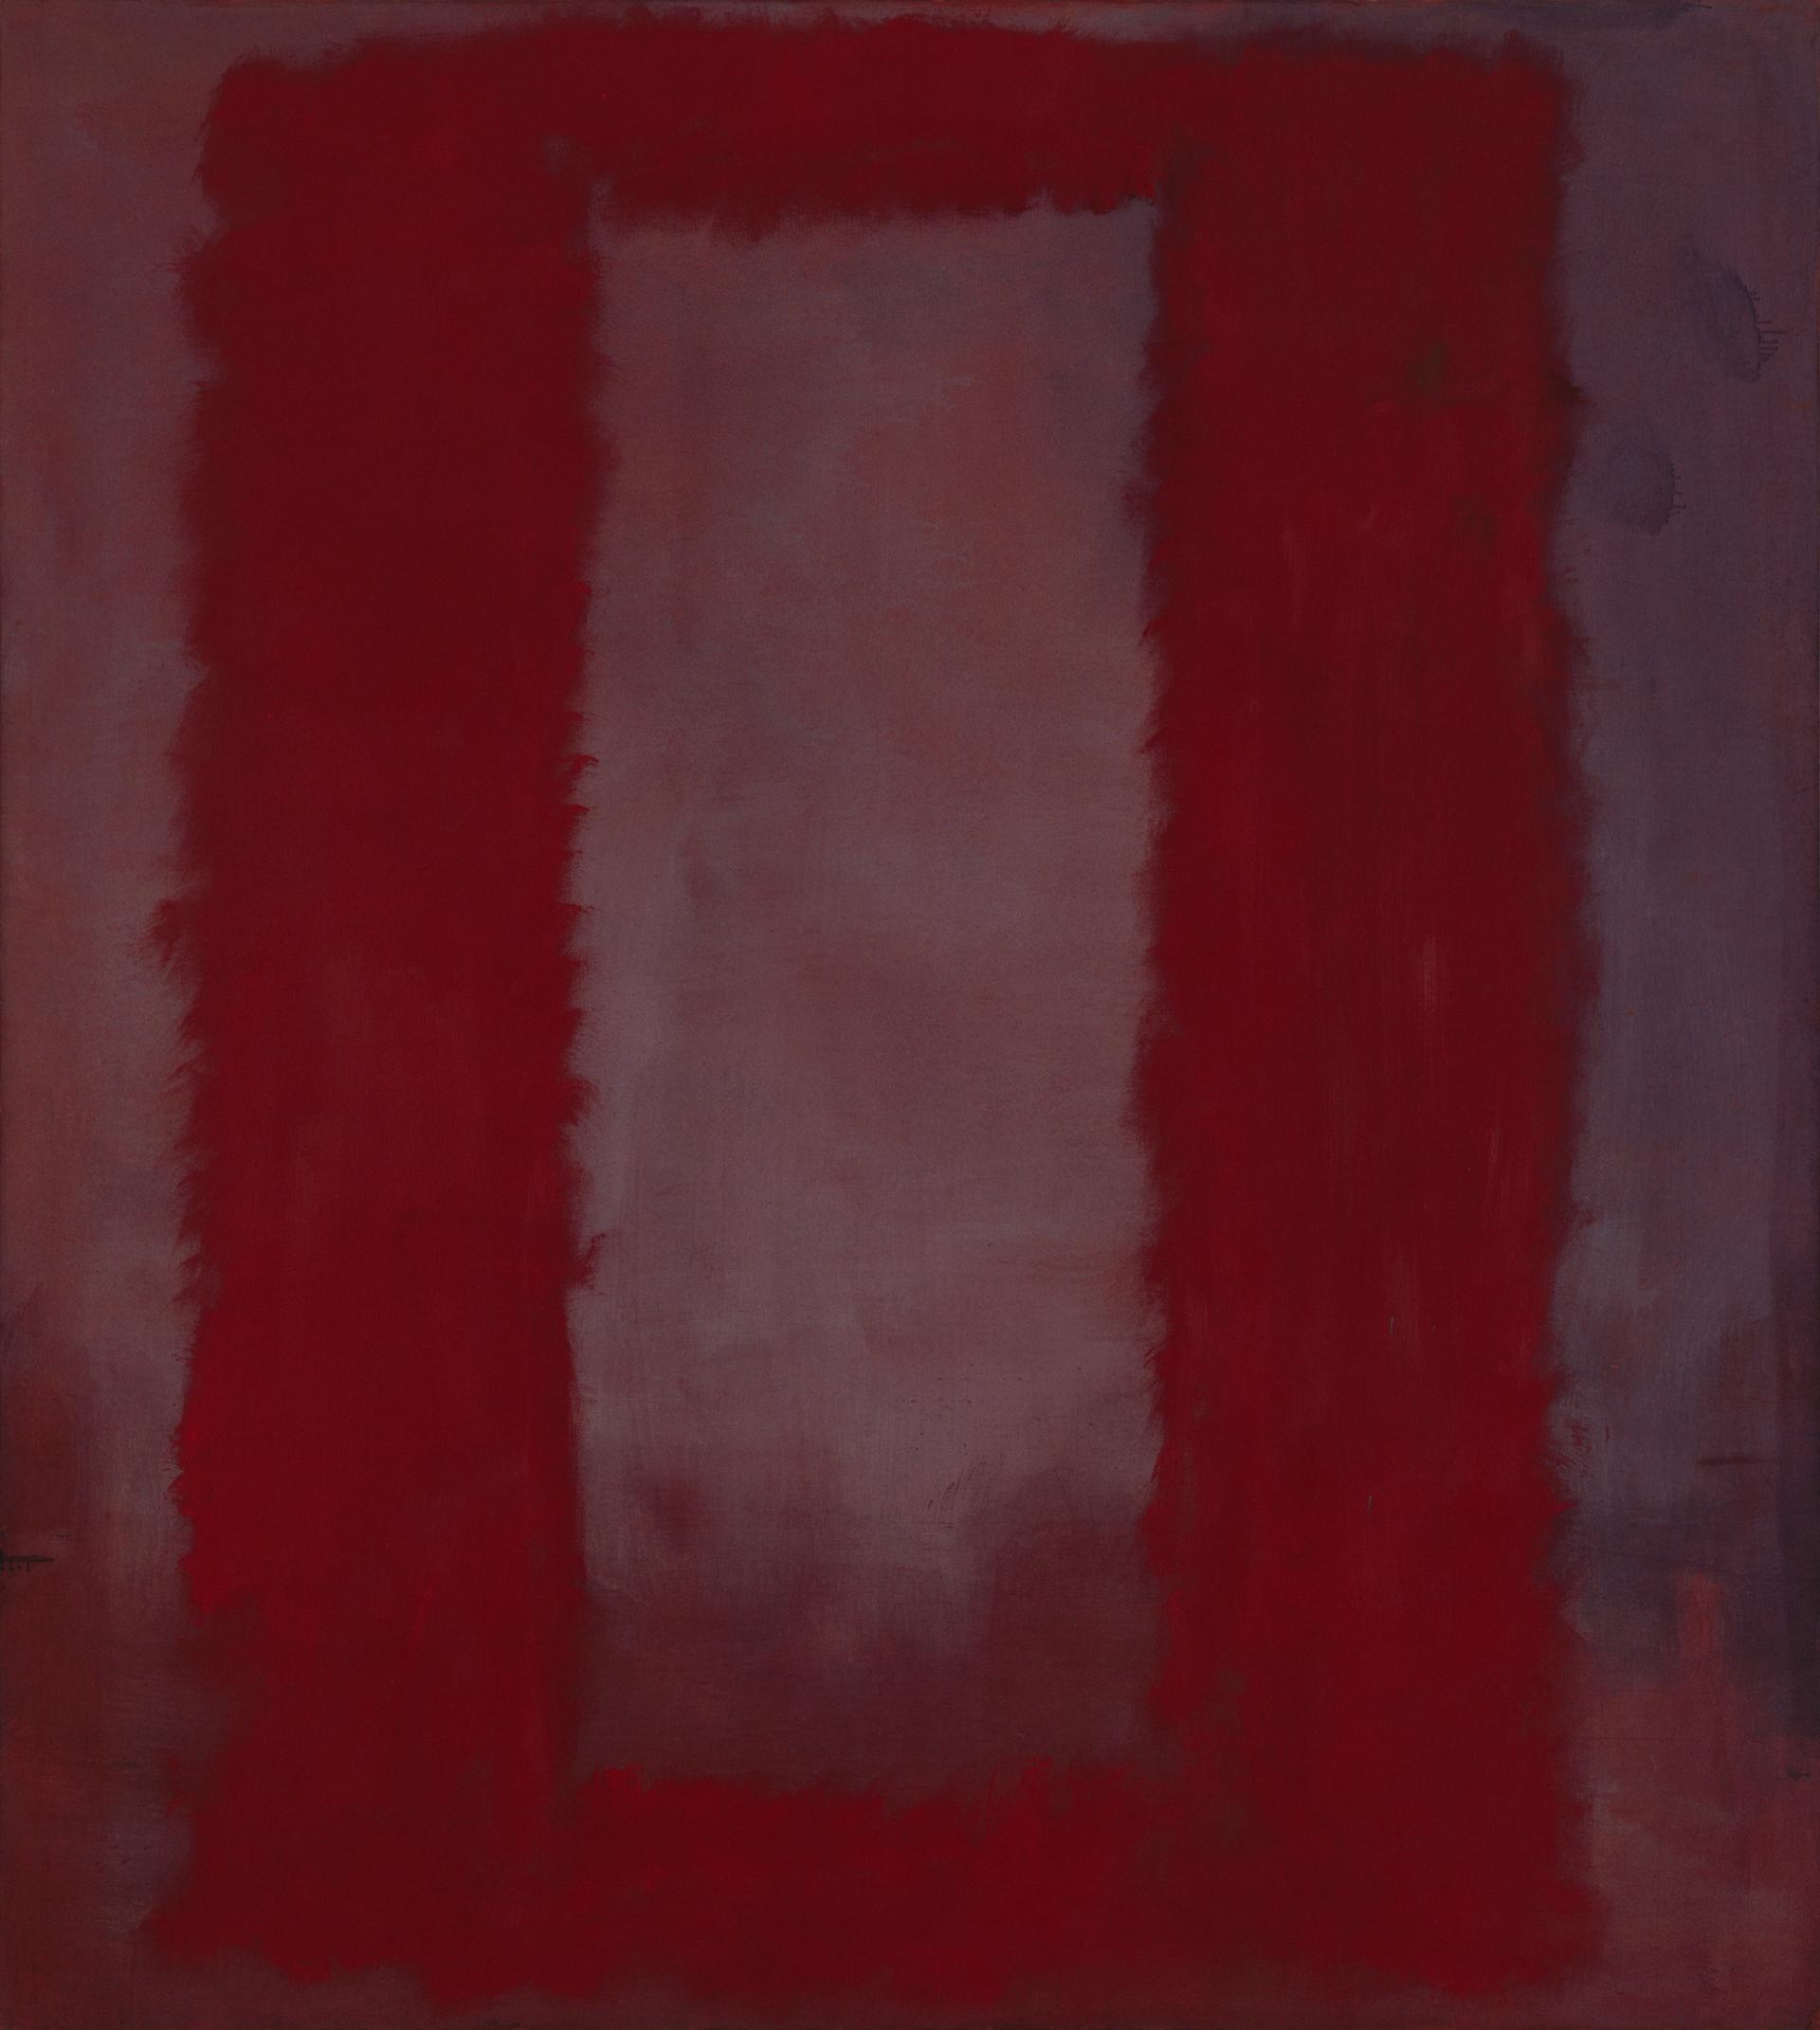 Review: A Stunning Mark Rothko Show at Paris's Fondation Louis